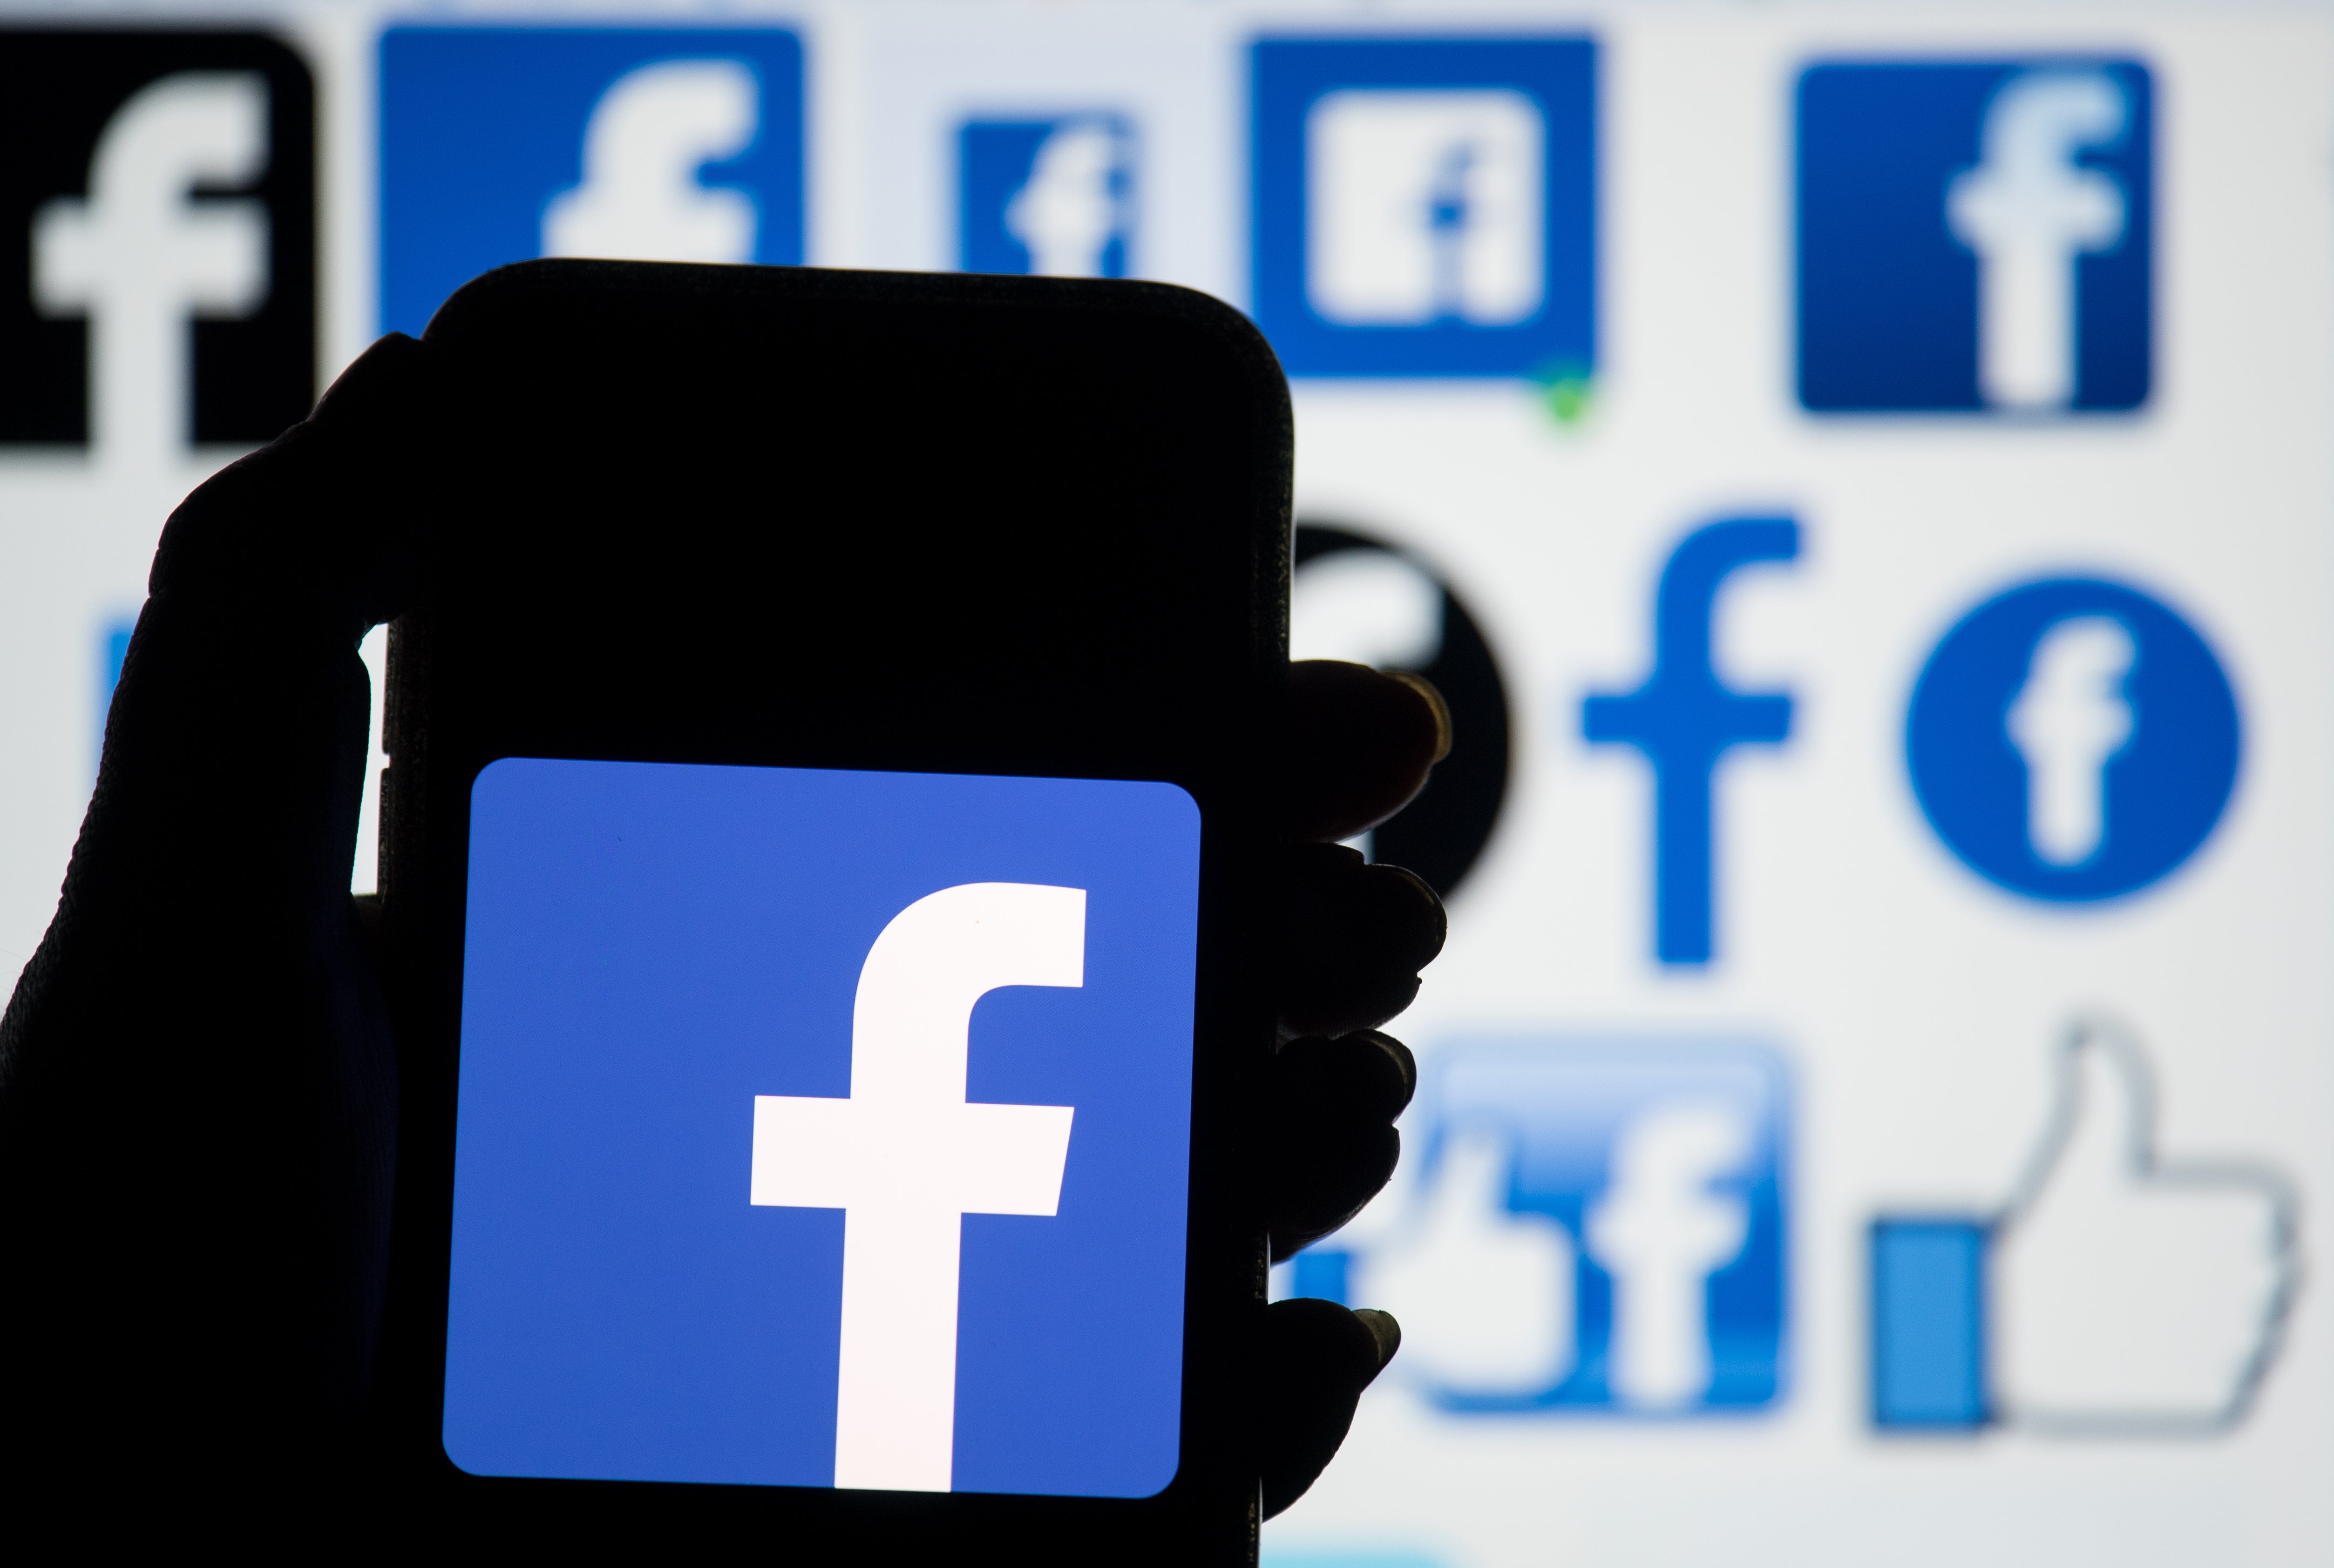 The logo of social networking site Facebook is displayed on a smartphone (Dominic Lipinski/PA)